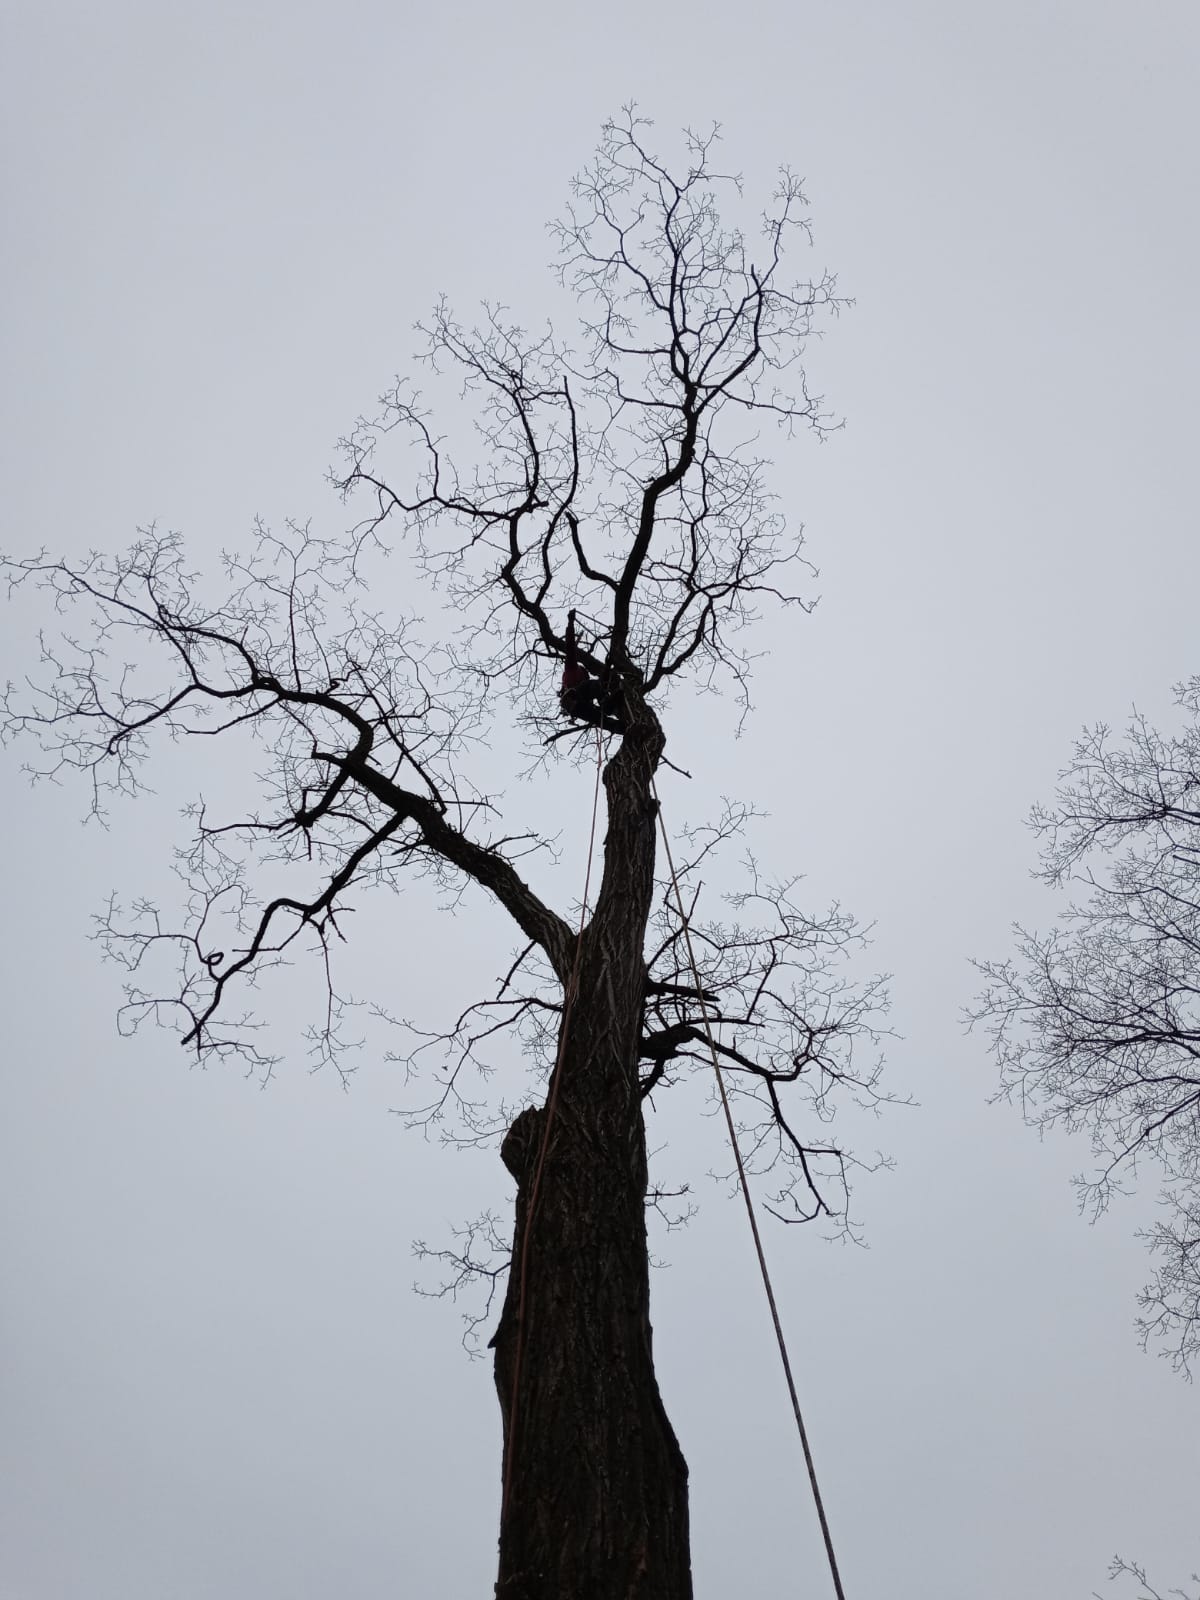 Tree Service in Piscataway,NJ on Dupont Ave